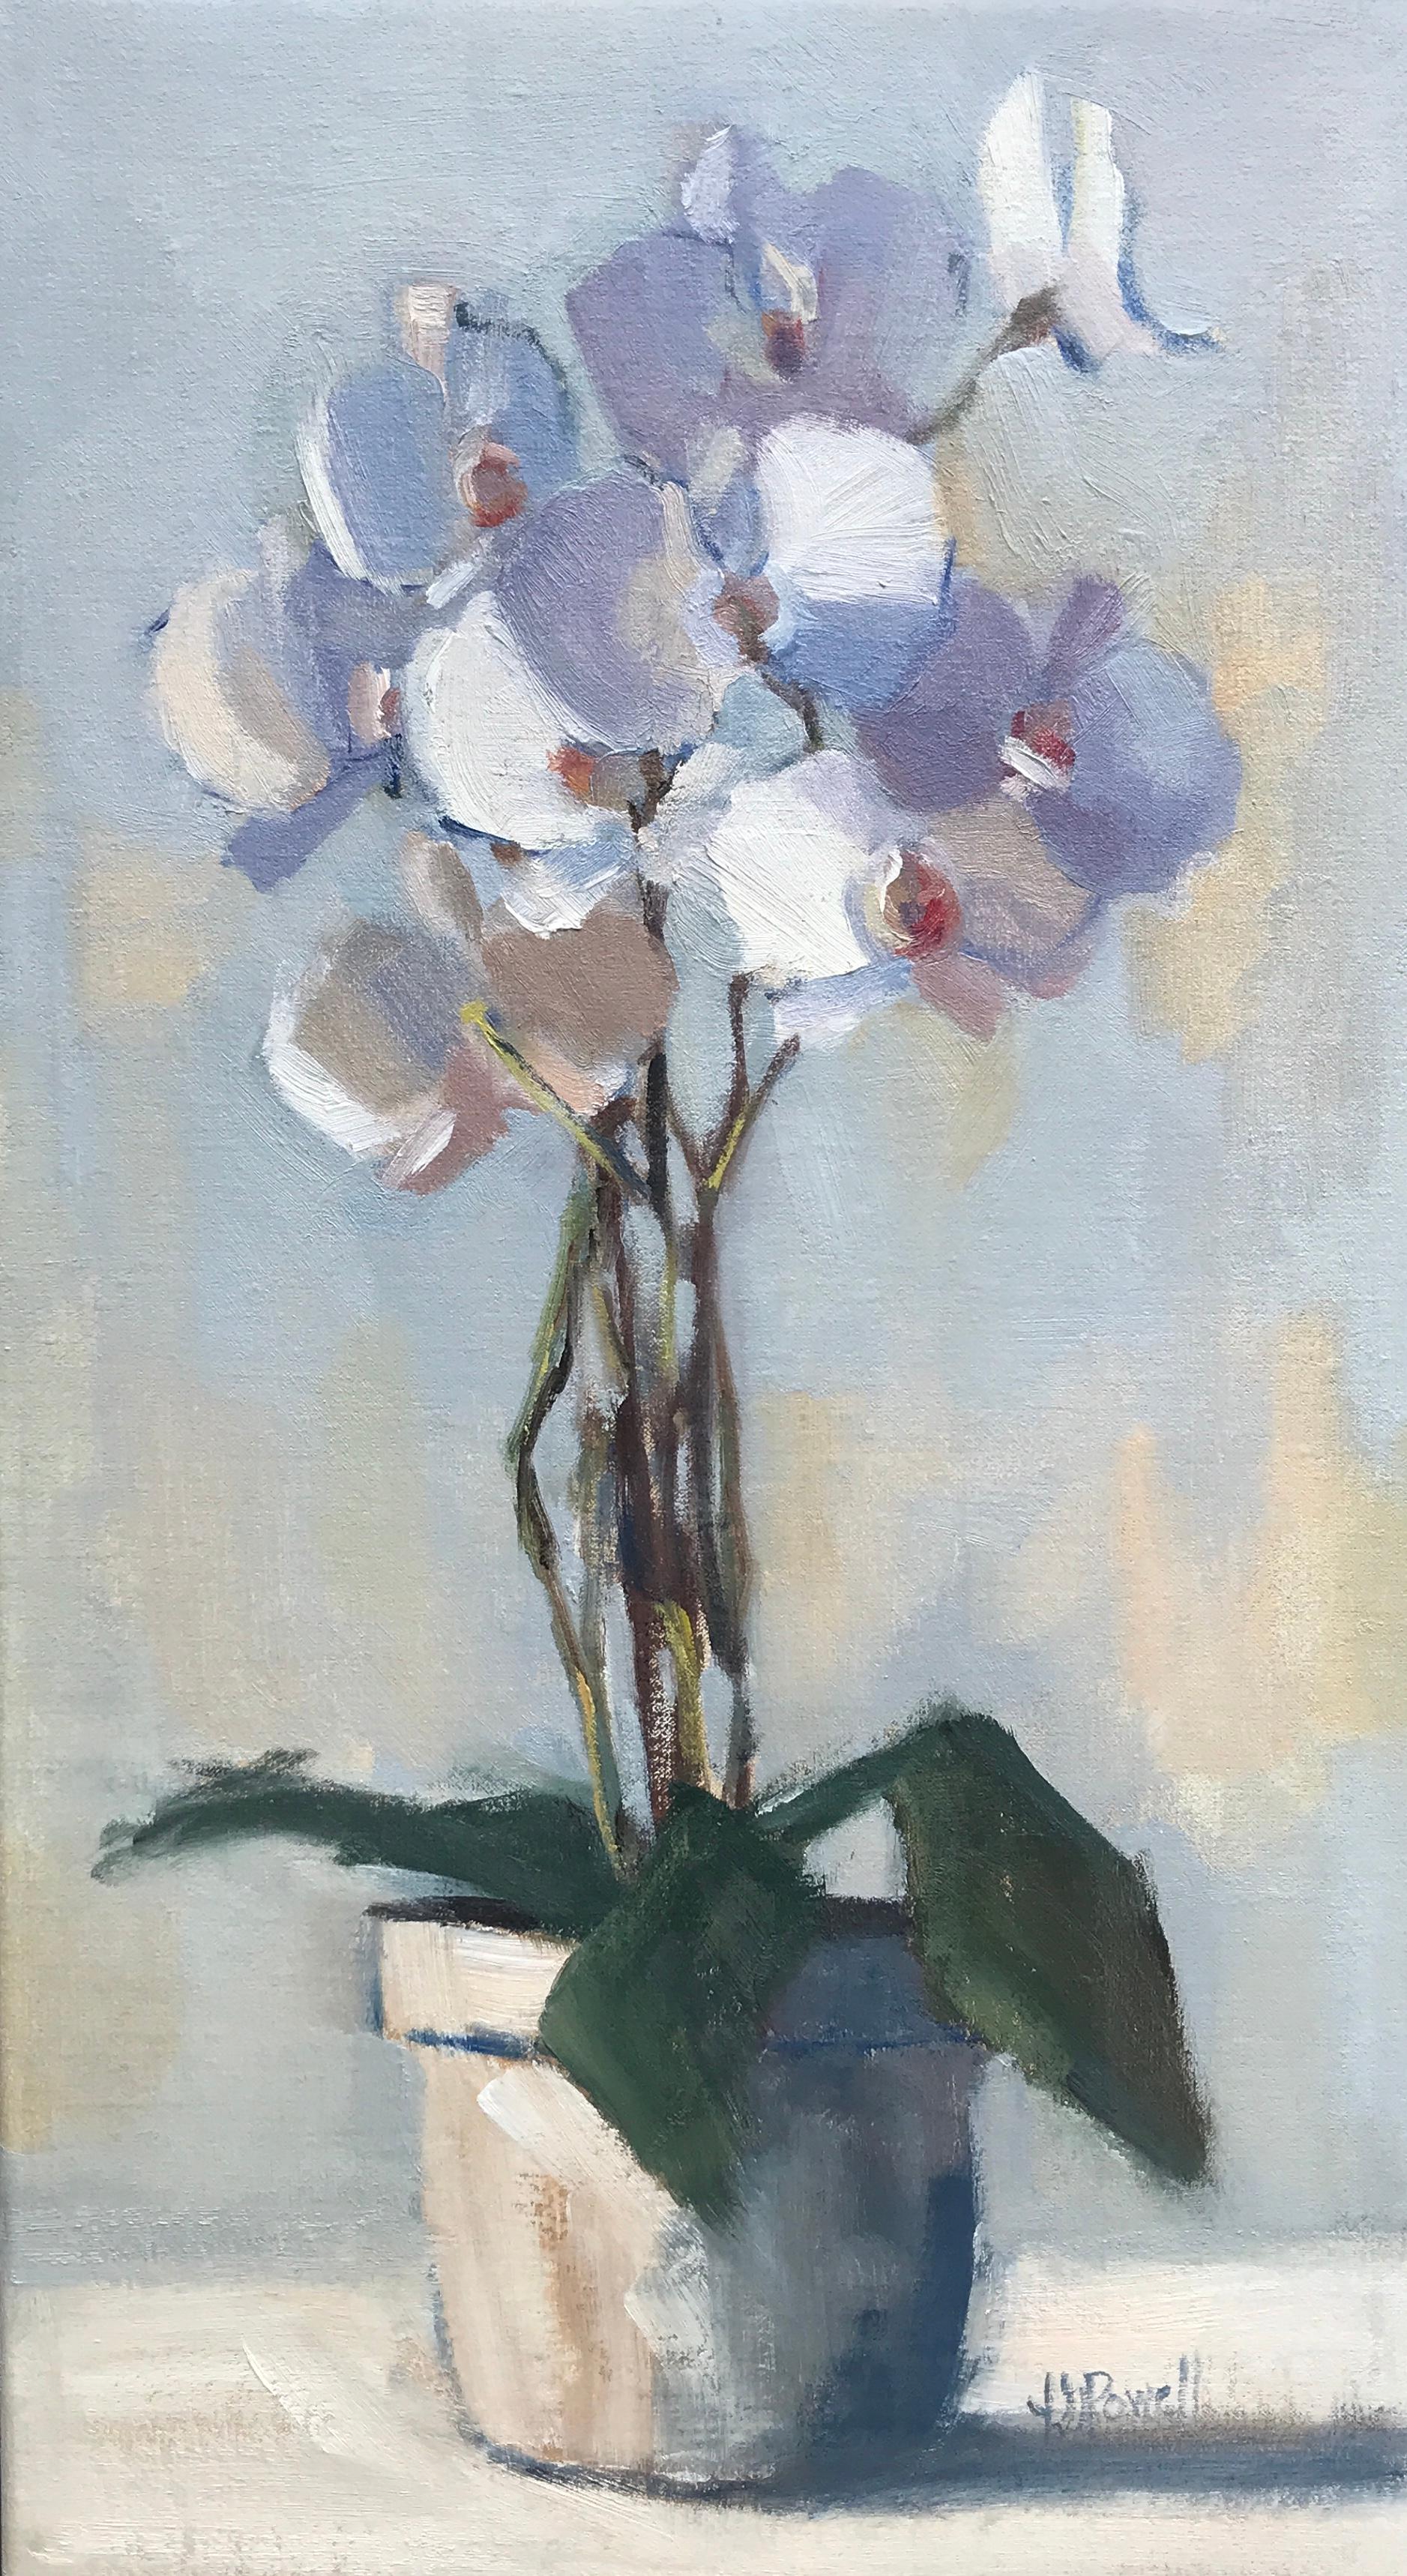 'Into the Light' is a framed Post-Impressionist oil on linen floral painting created by American artist Lesley Powell in 2018. Featuring a soft palette made of purple, blue, white, green and beige colors, this vertical Post-Impressionist painting